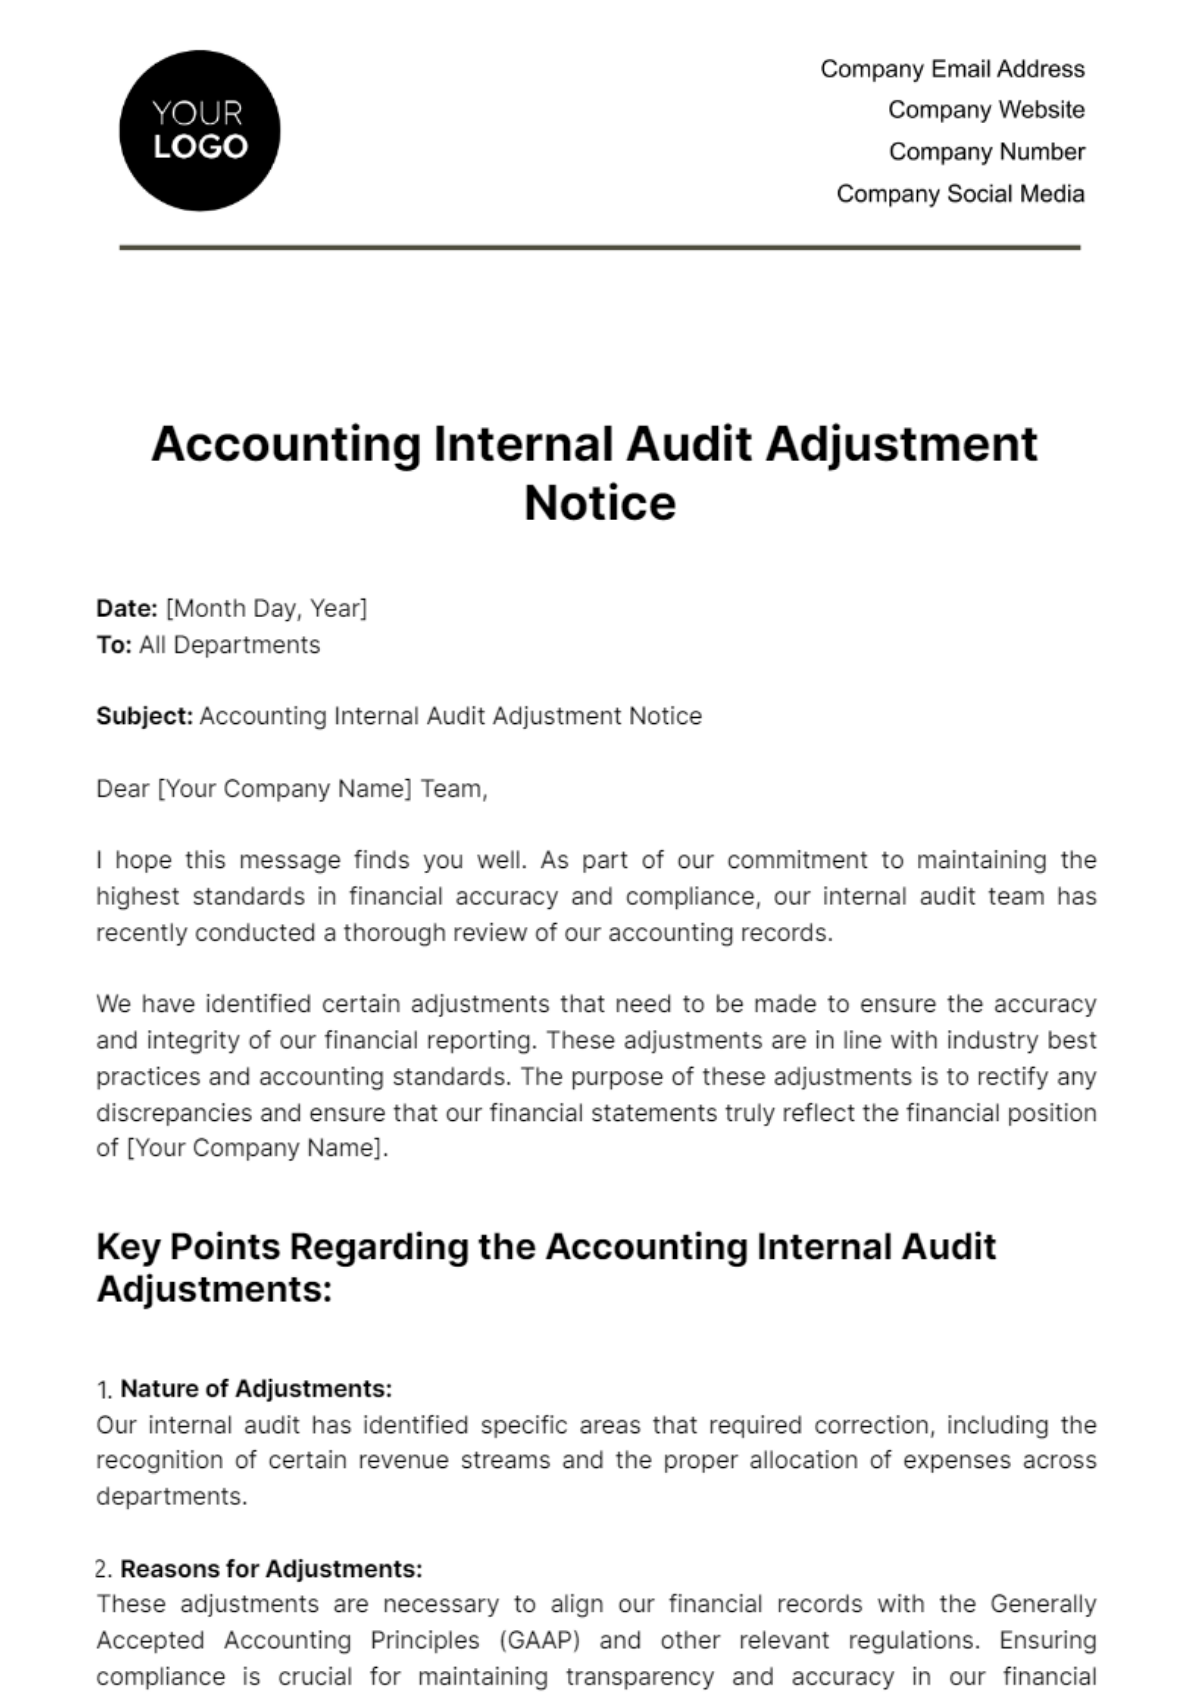 Accounting Internal Audit Adjustment Notice Template